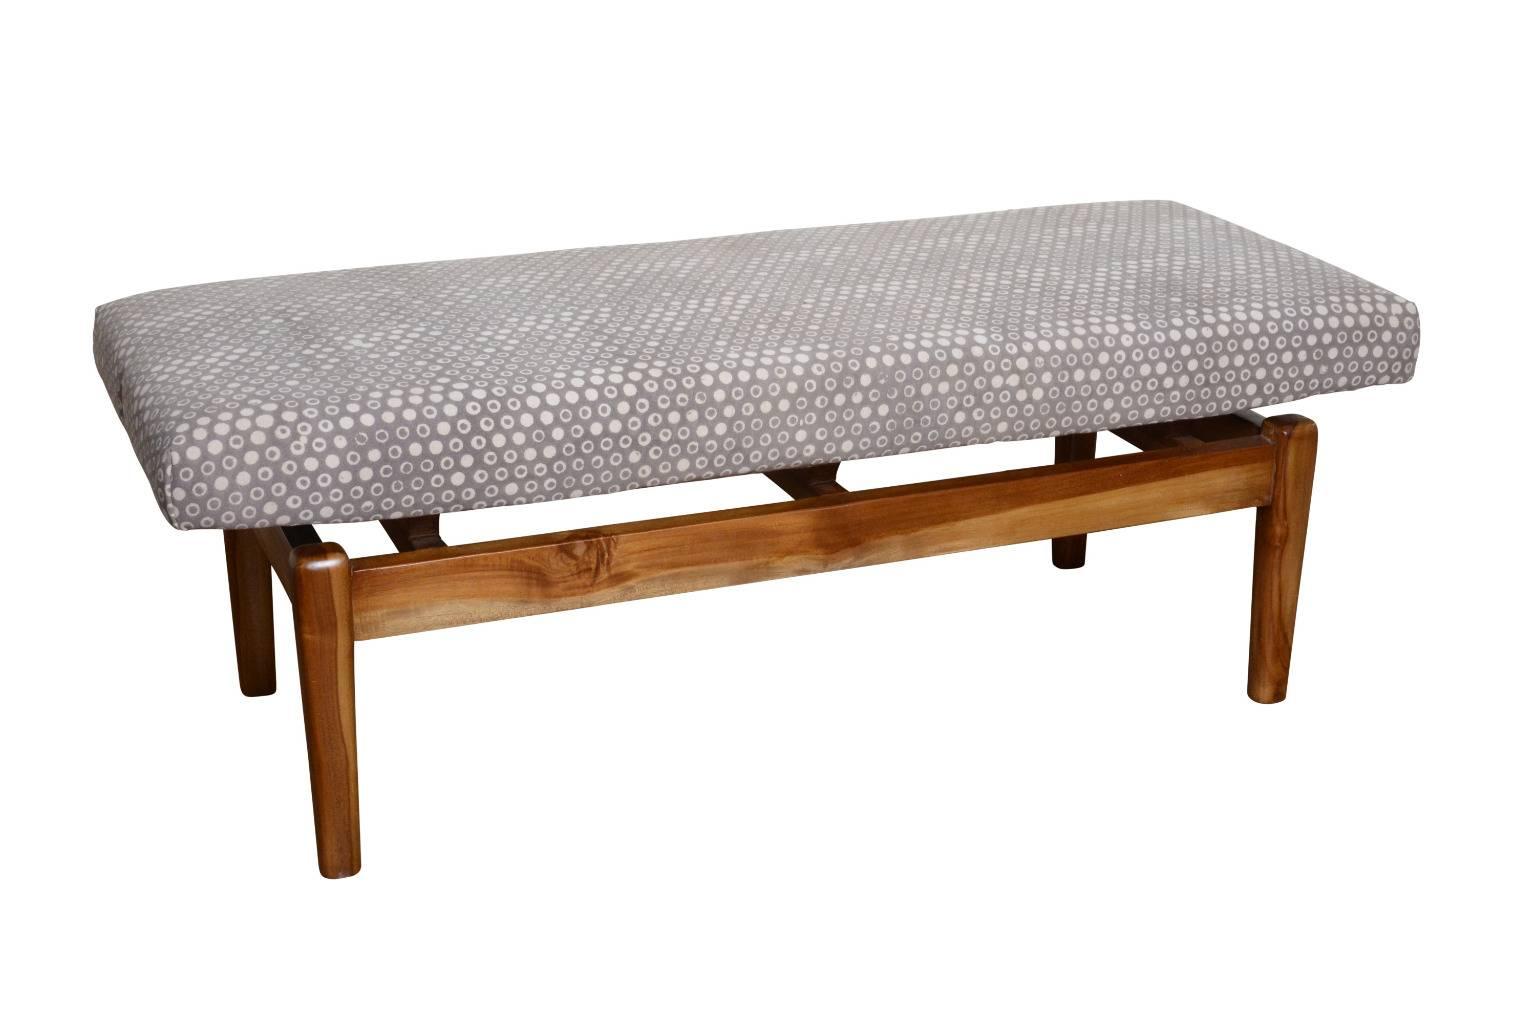 Contemporary teak bench upholstered in kashish dyed cotton. Kashish is a natural dye that produced tones in the grey to brown range, this fabric is beautiful hand block-printed cotton sourced from India. 


   